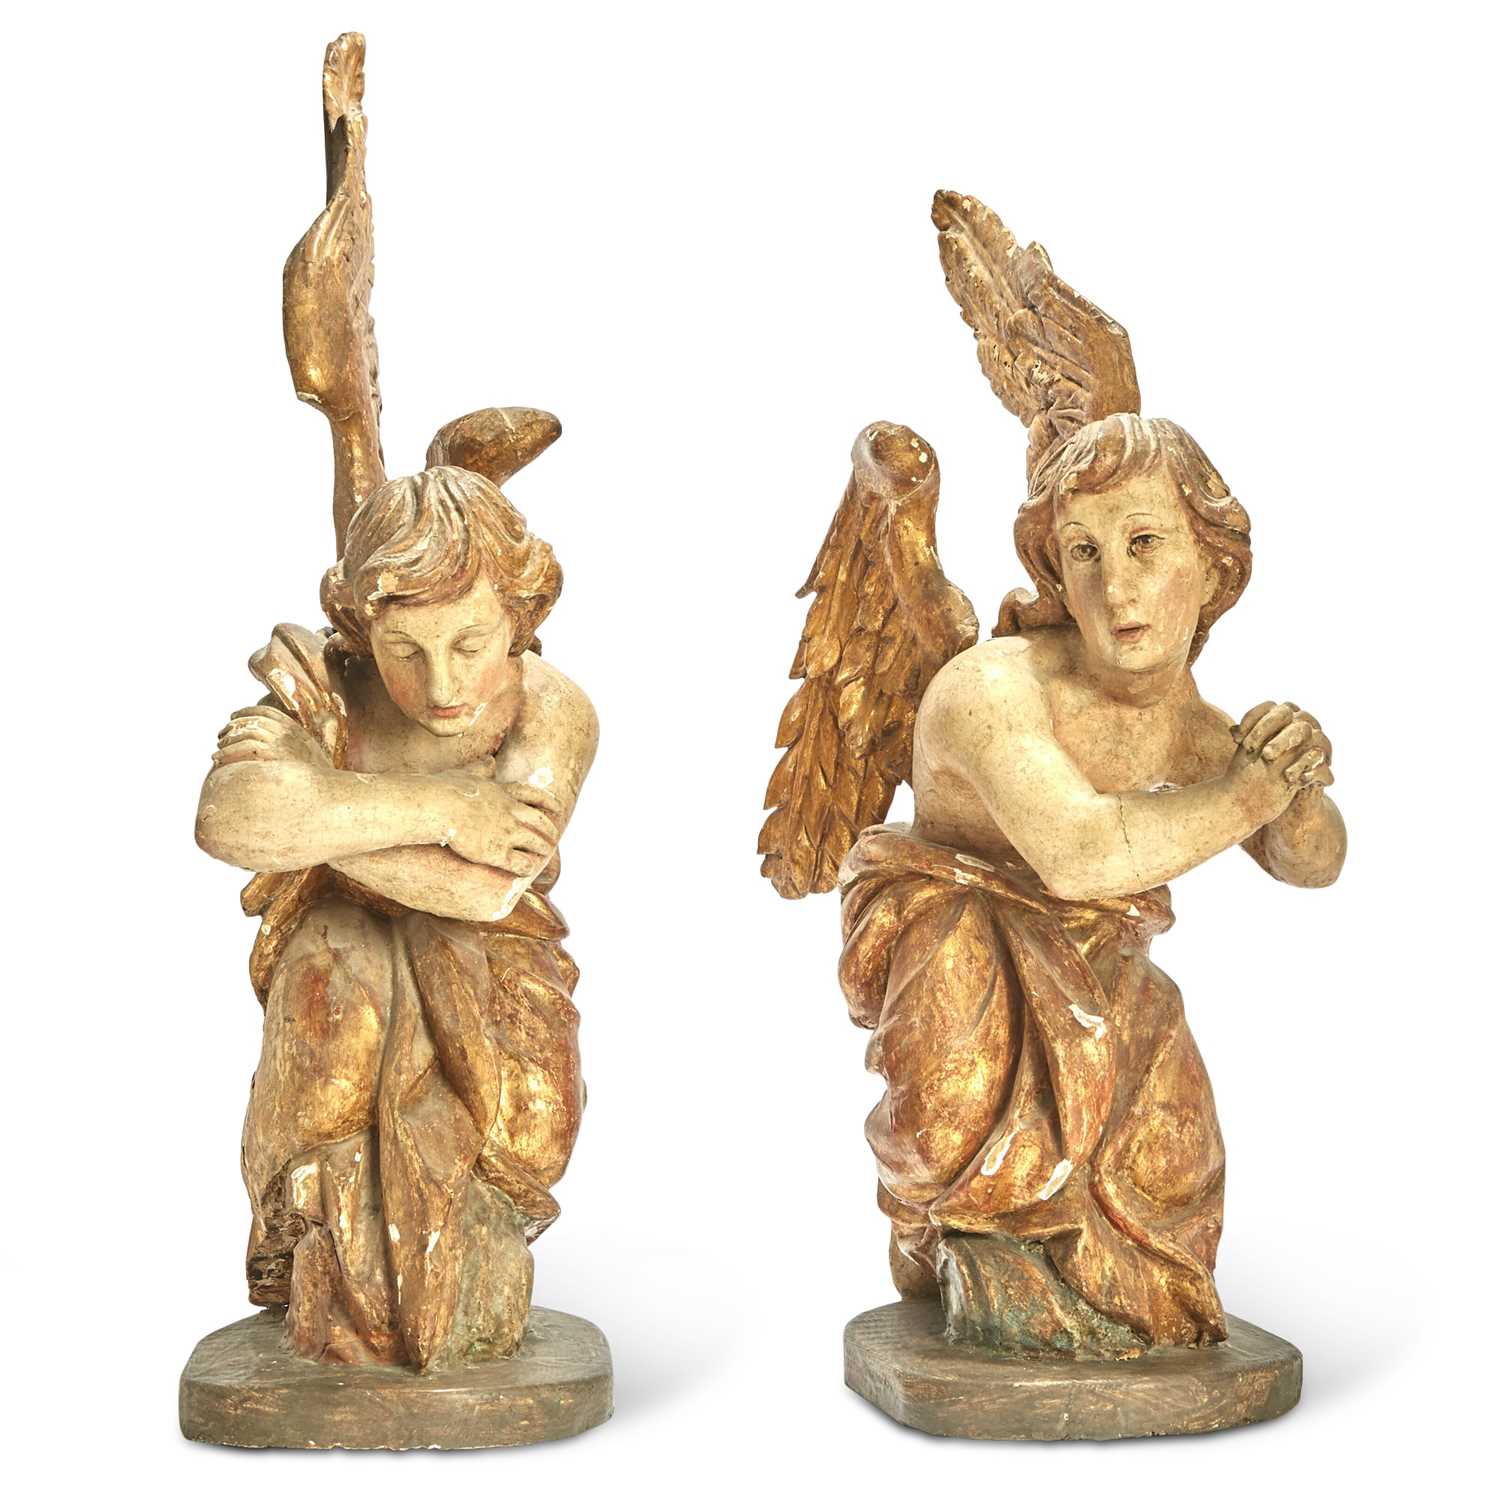 Lot 416 - Pair of Italian Polychromed and Parcel-Gilt Carved Wood  Figures of Angels